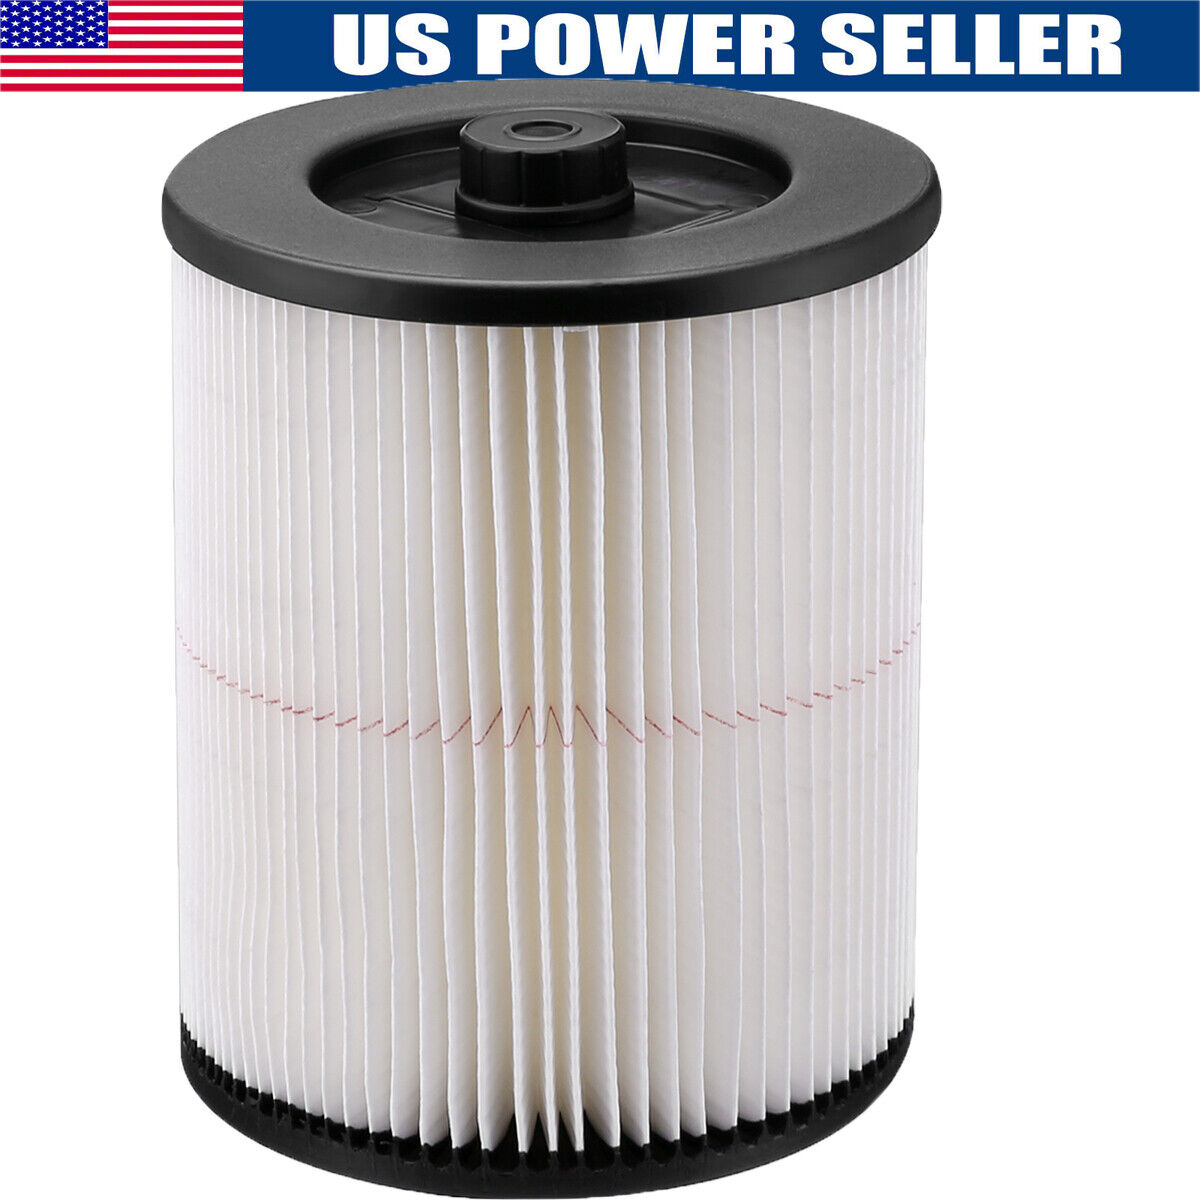 Cartridge Filter for Shop Vac Craftsman 9-17816 Wet Dry Air Filter Replacement